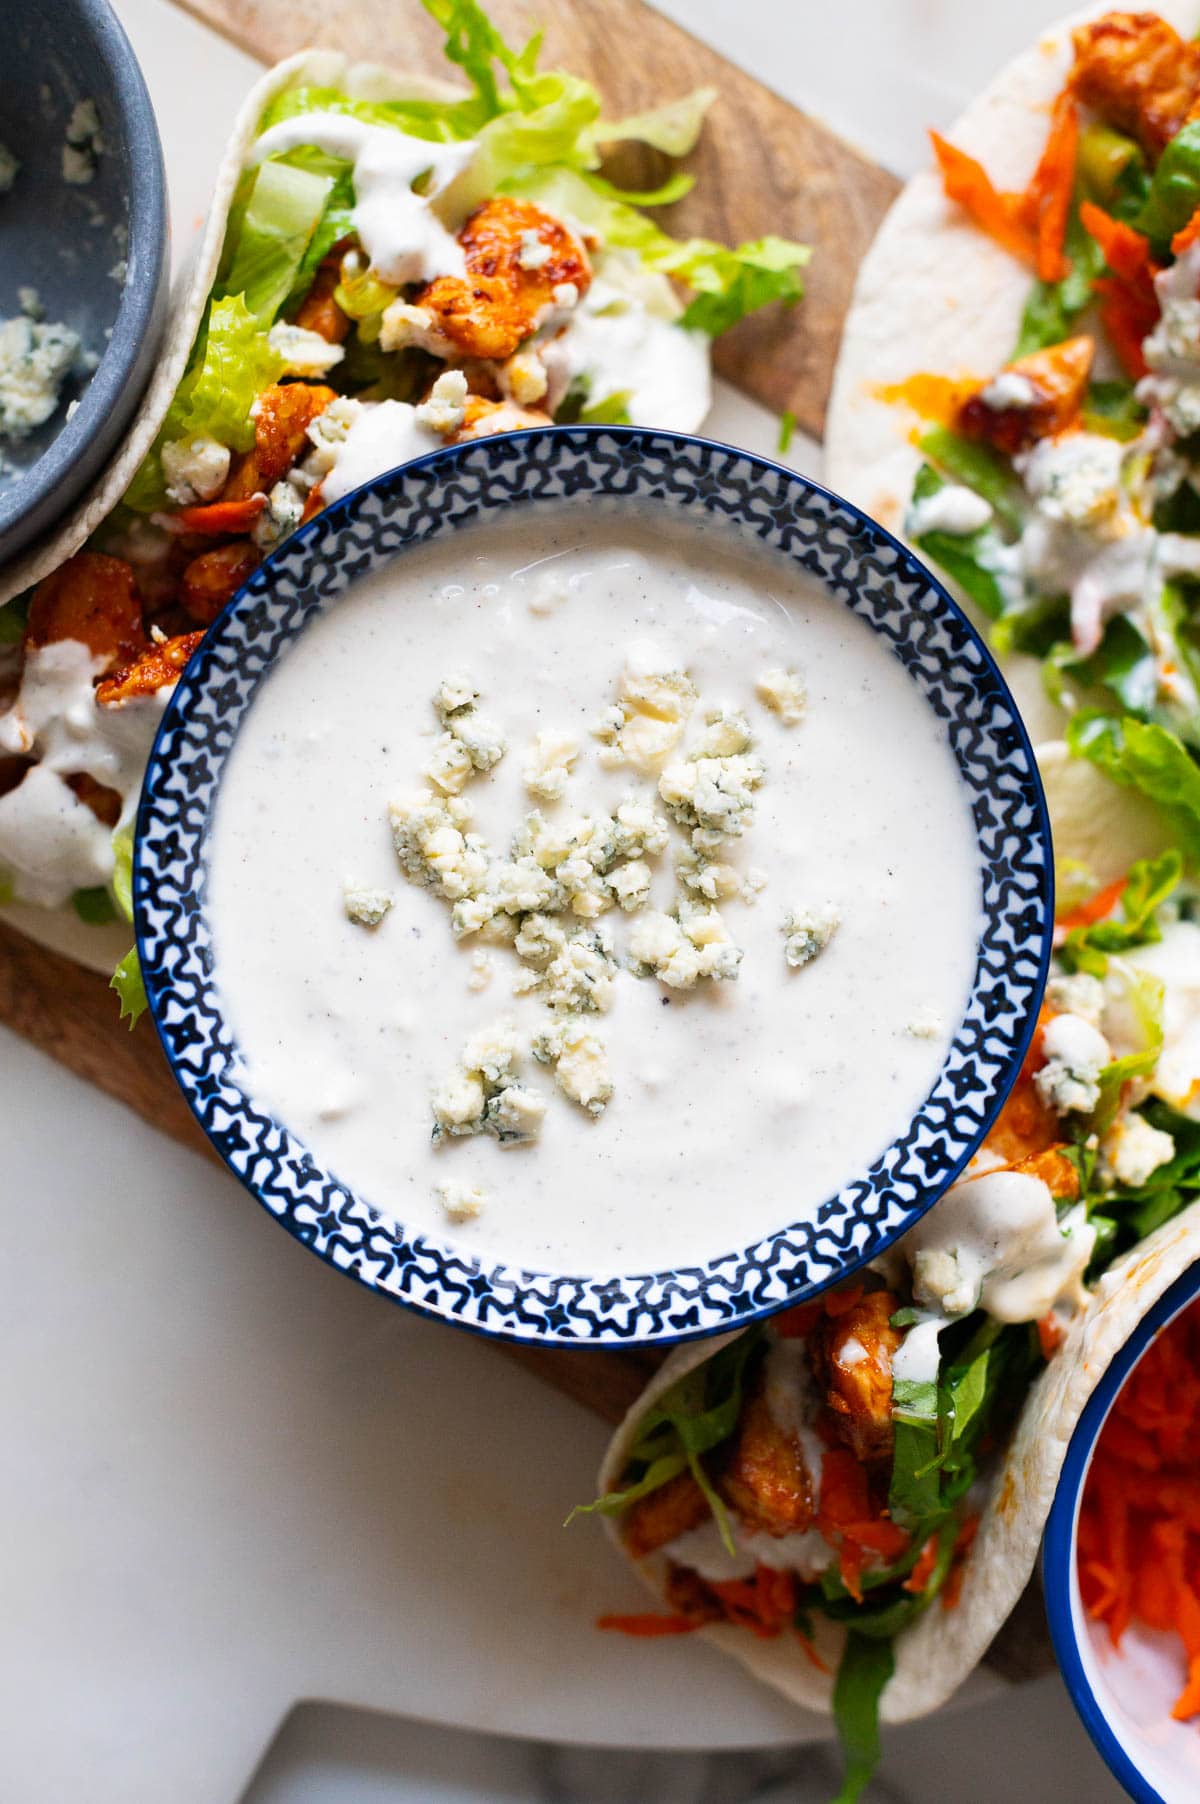 Yogurt blue cheese dressing with crumbled blue cheese in a bowl served with tacos.